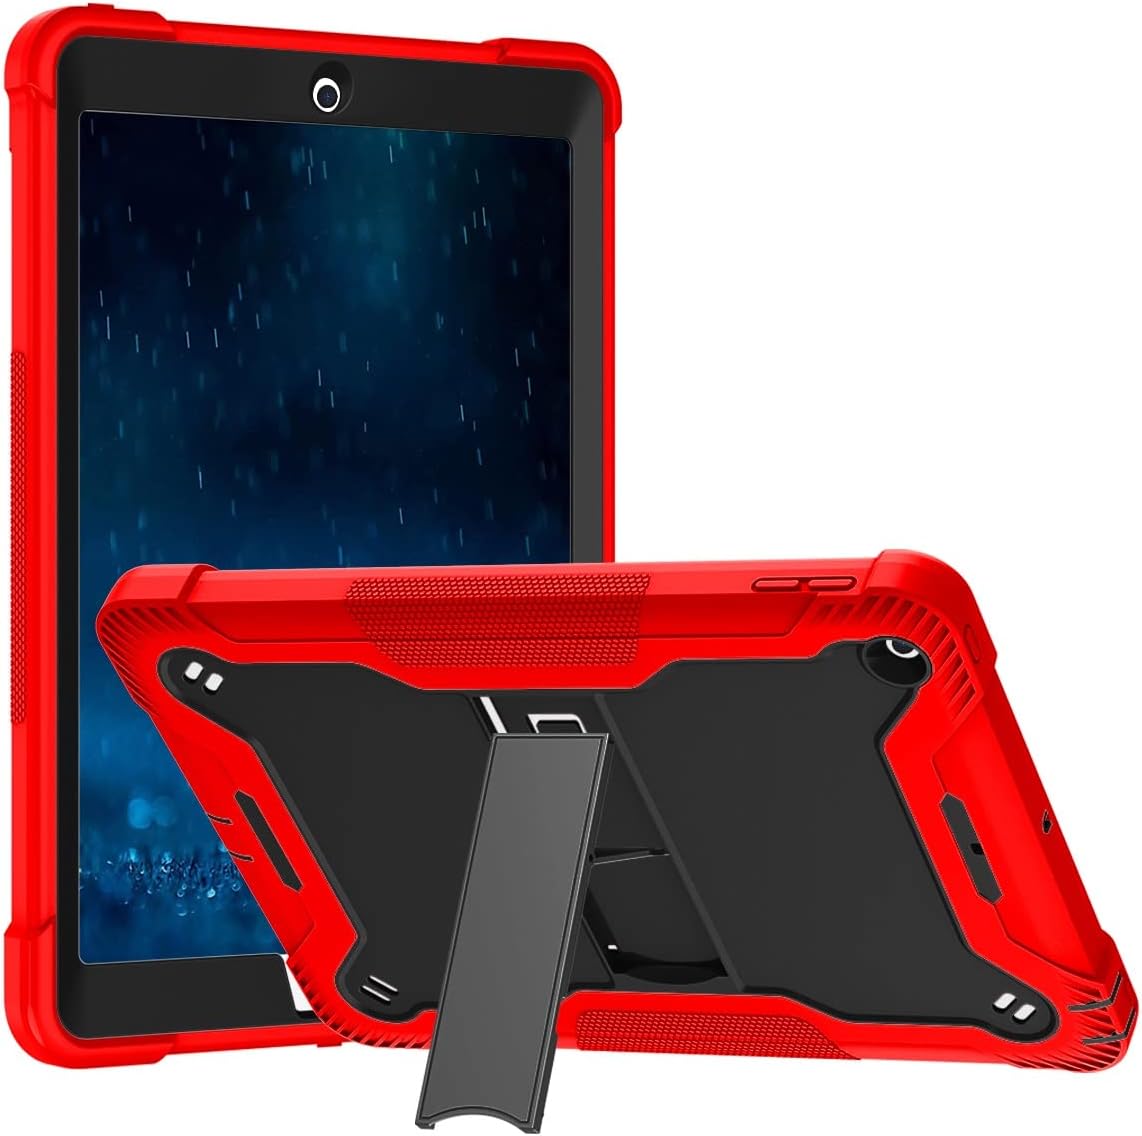 Apple iPad 5, 6, Air 2 (9.7 inch) Red Black Shockproof Rugged Case with Kickstand